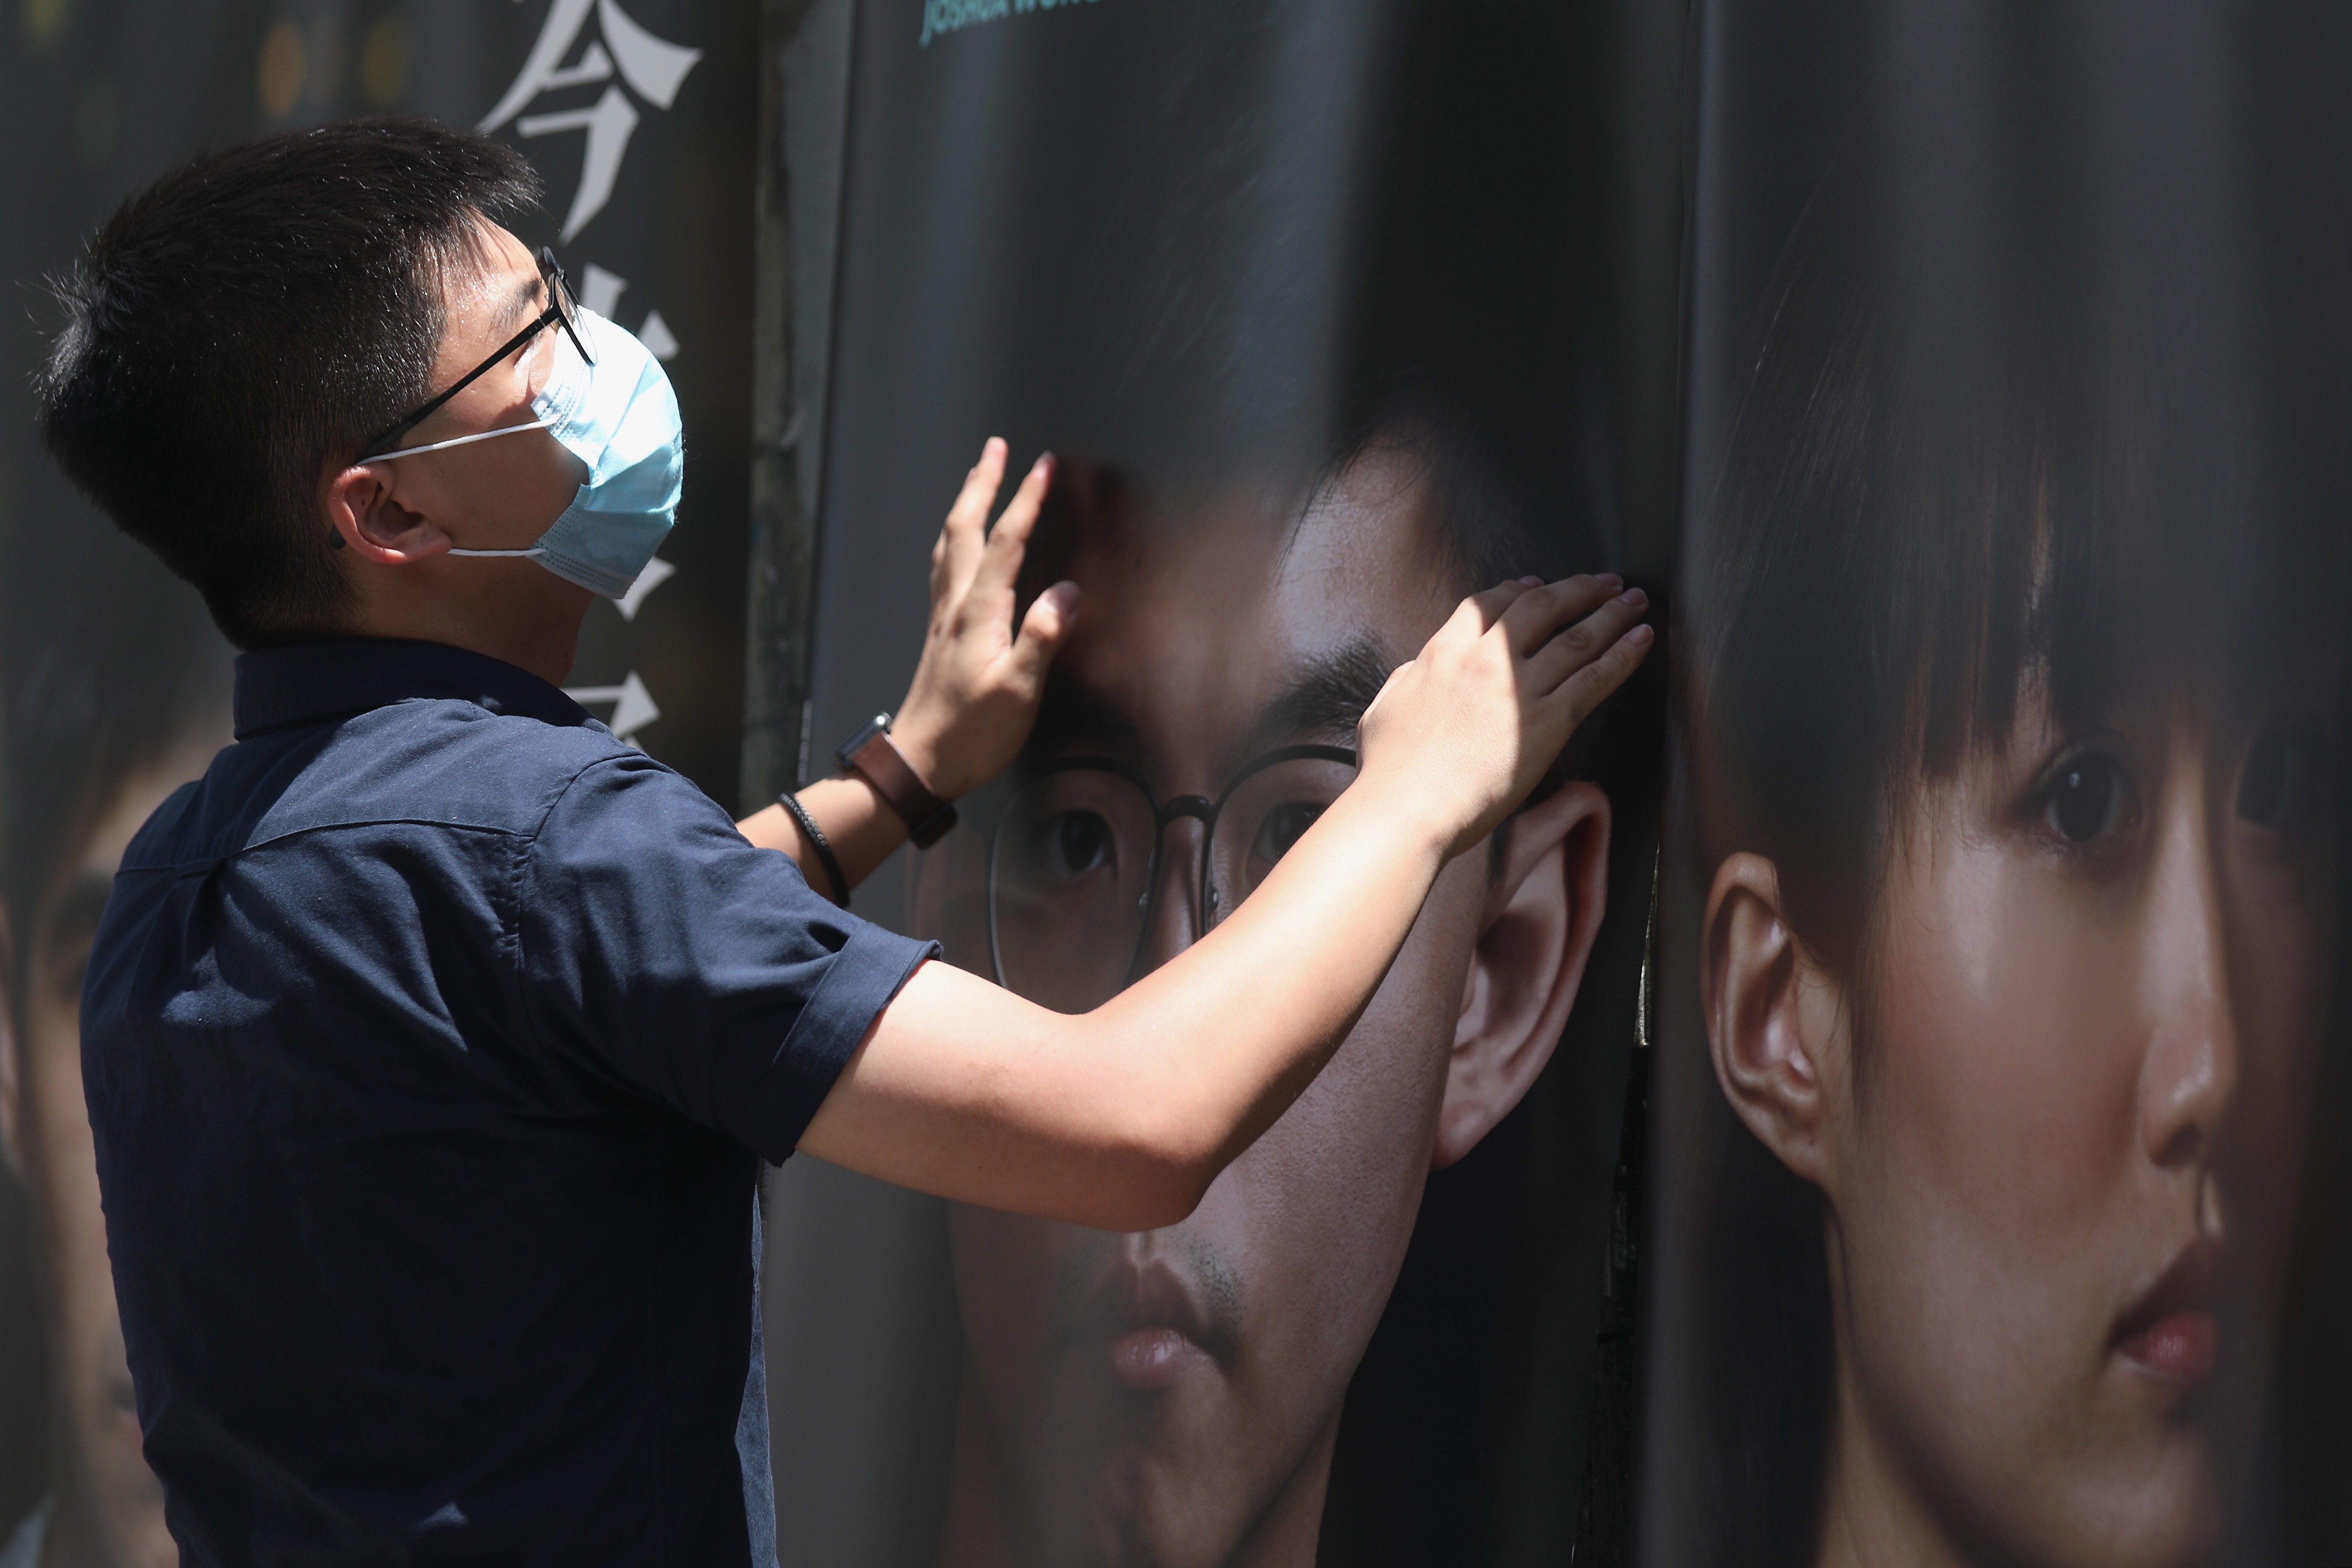 Joshua Wong, who hopes to run for a seat in Hong Kong’s Legislative Council elections in September, has said he will not sign a document pledging allegiance to the city and Basic Law. Photo: Xiaomei Chen